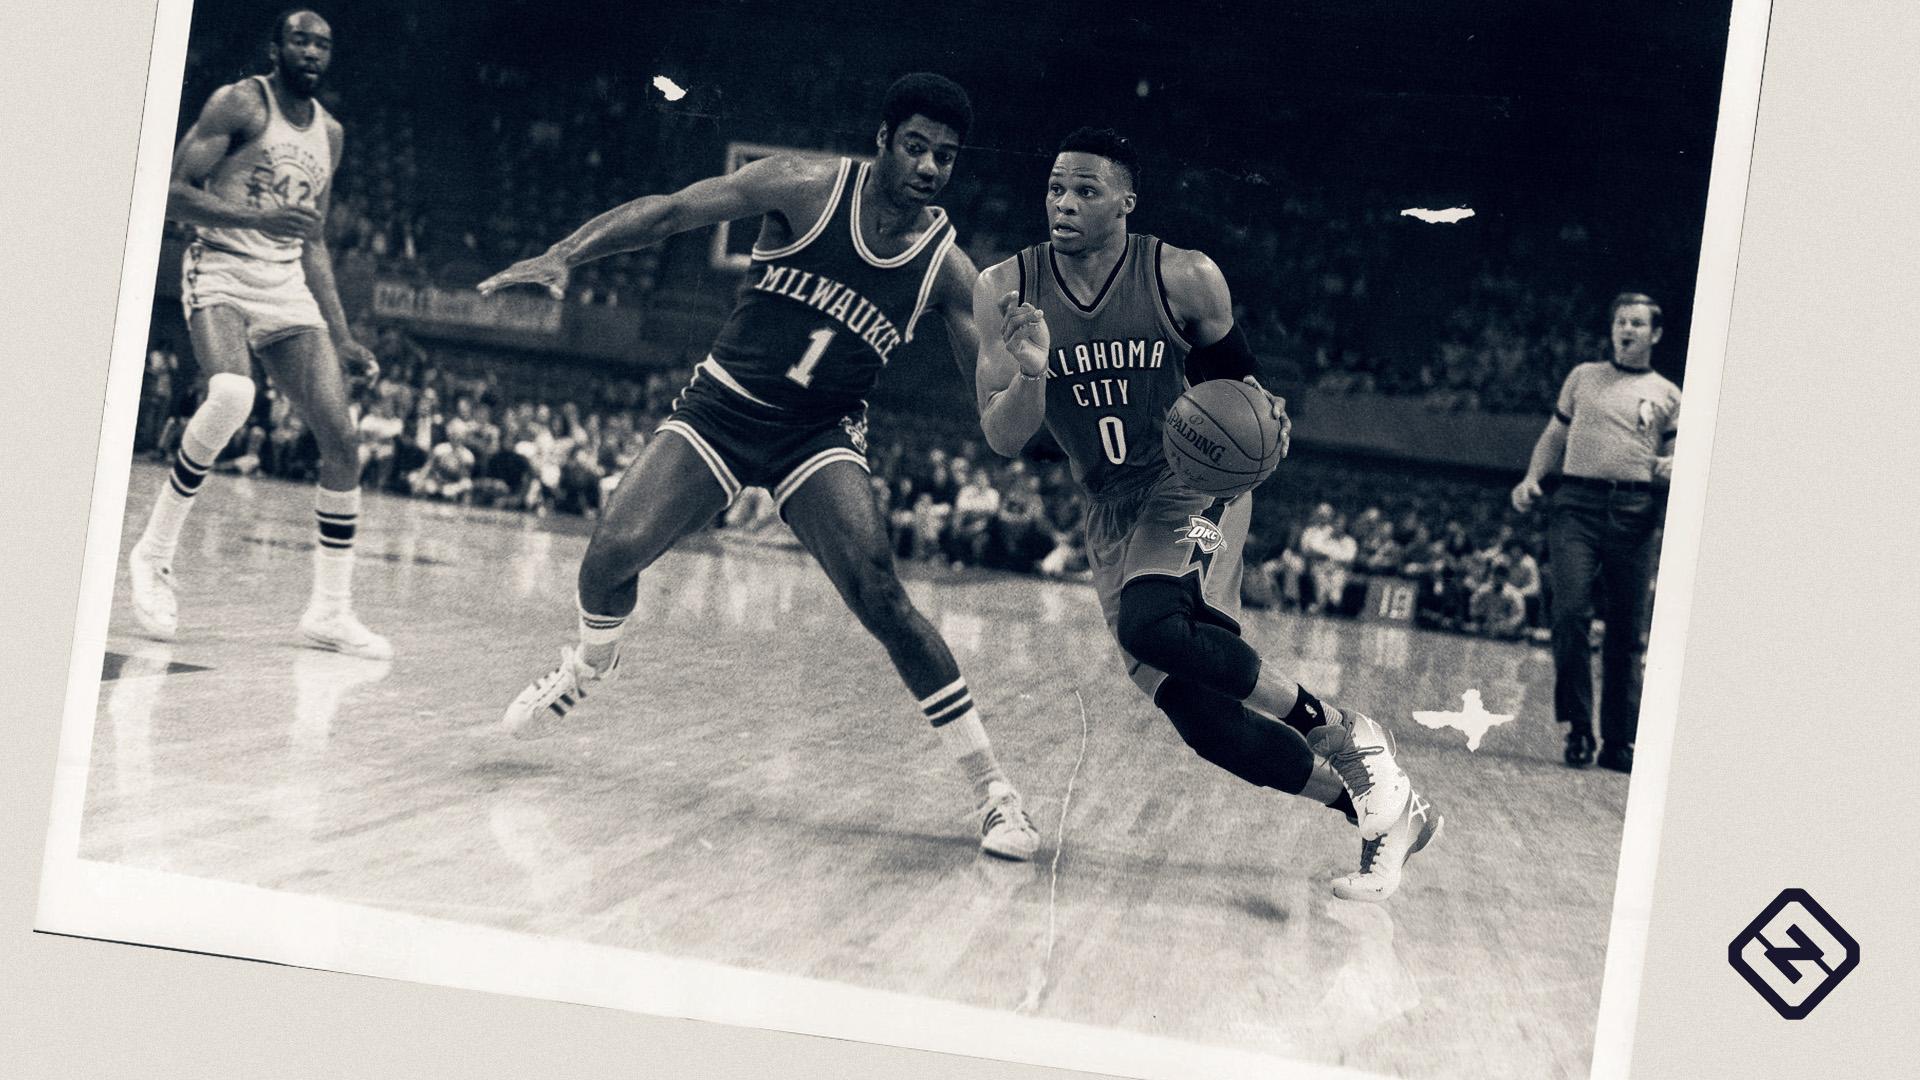 How Russell Westbrook compares to Oscar Robertson, according to Big